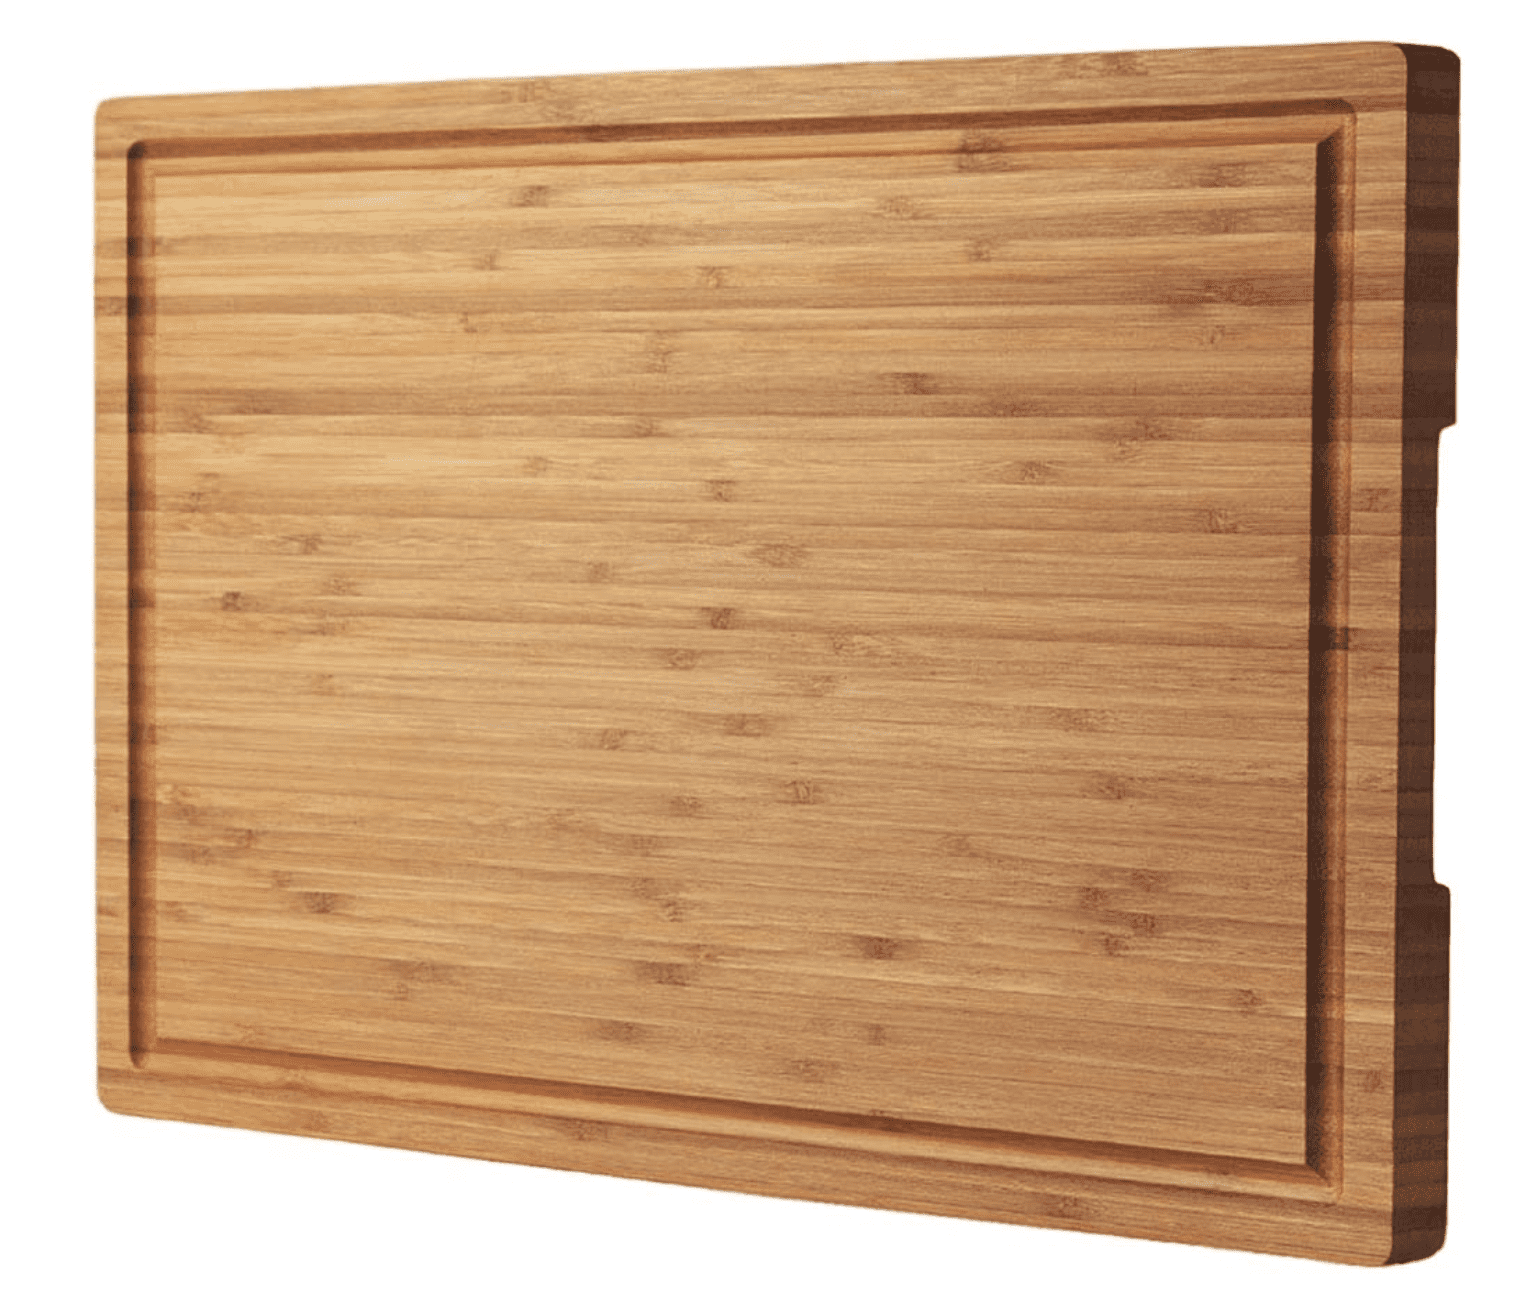 Chopping Board Speckled Made From 100% Recycled Plastic 3 Sizes or